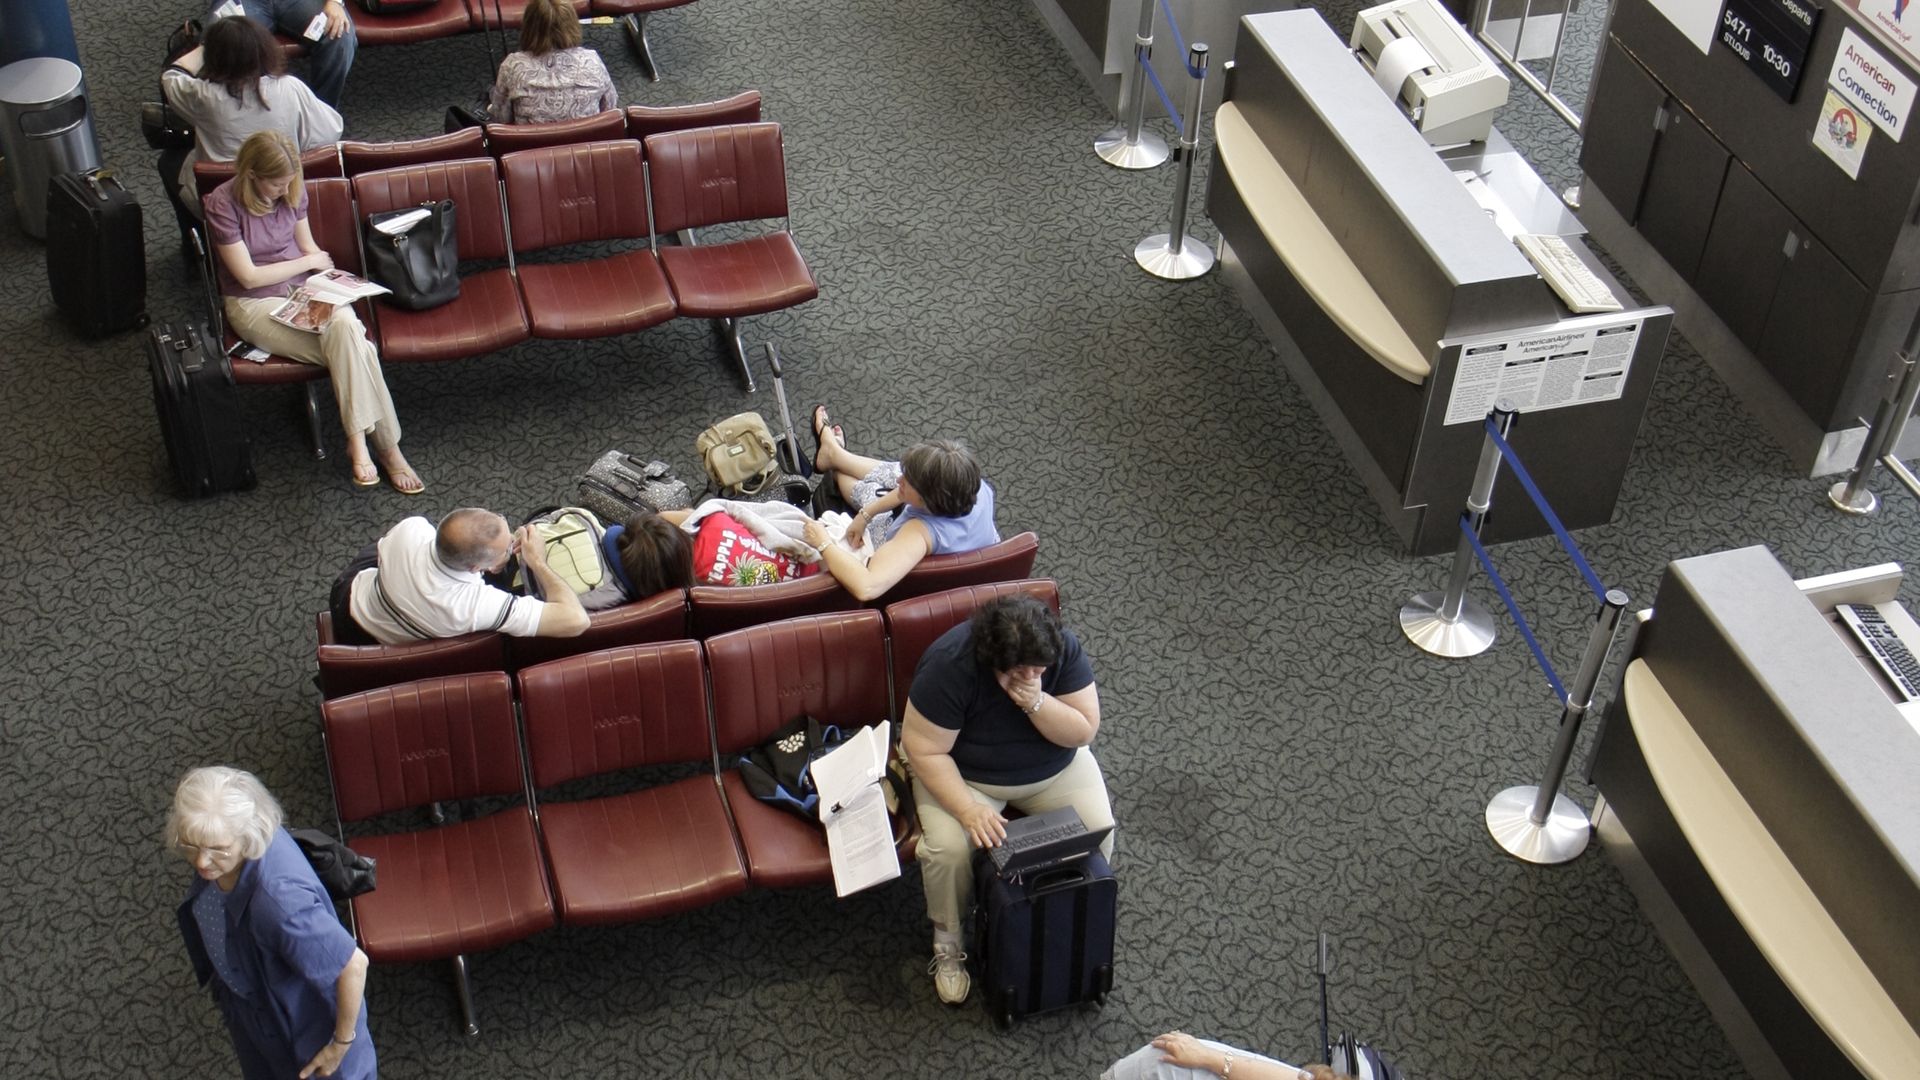 A photo of people waiting at an airport terminal.